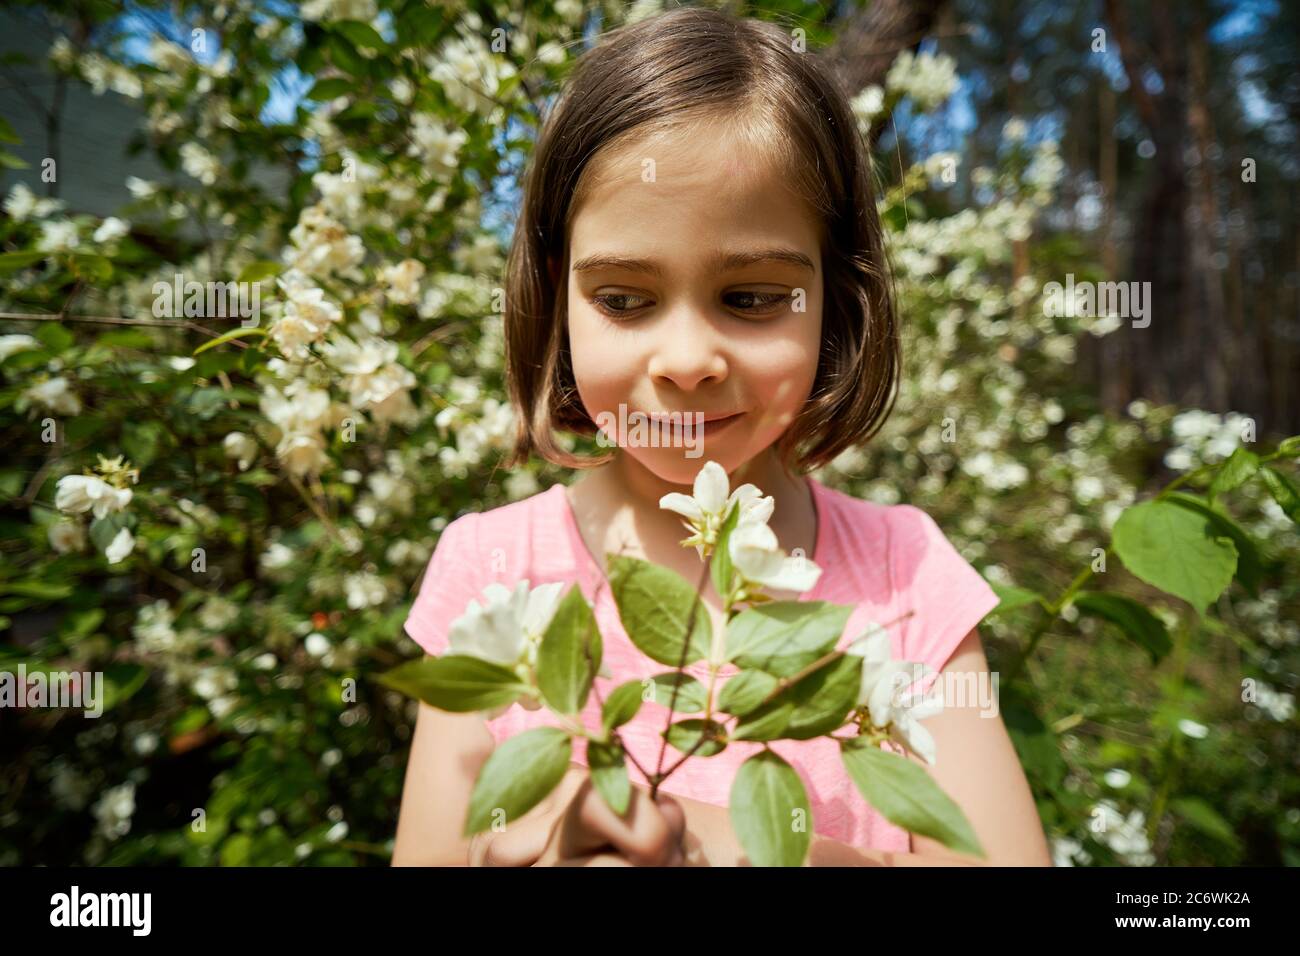 adorable girl making faces with jasmine flower Stock Photo